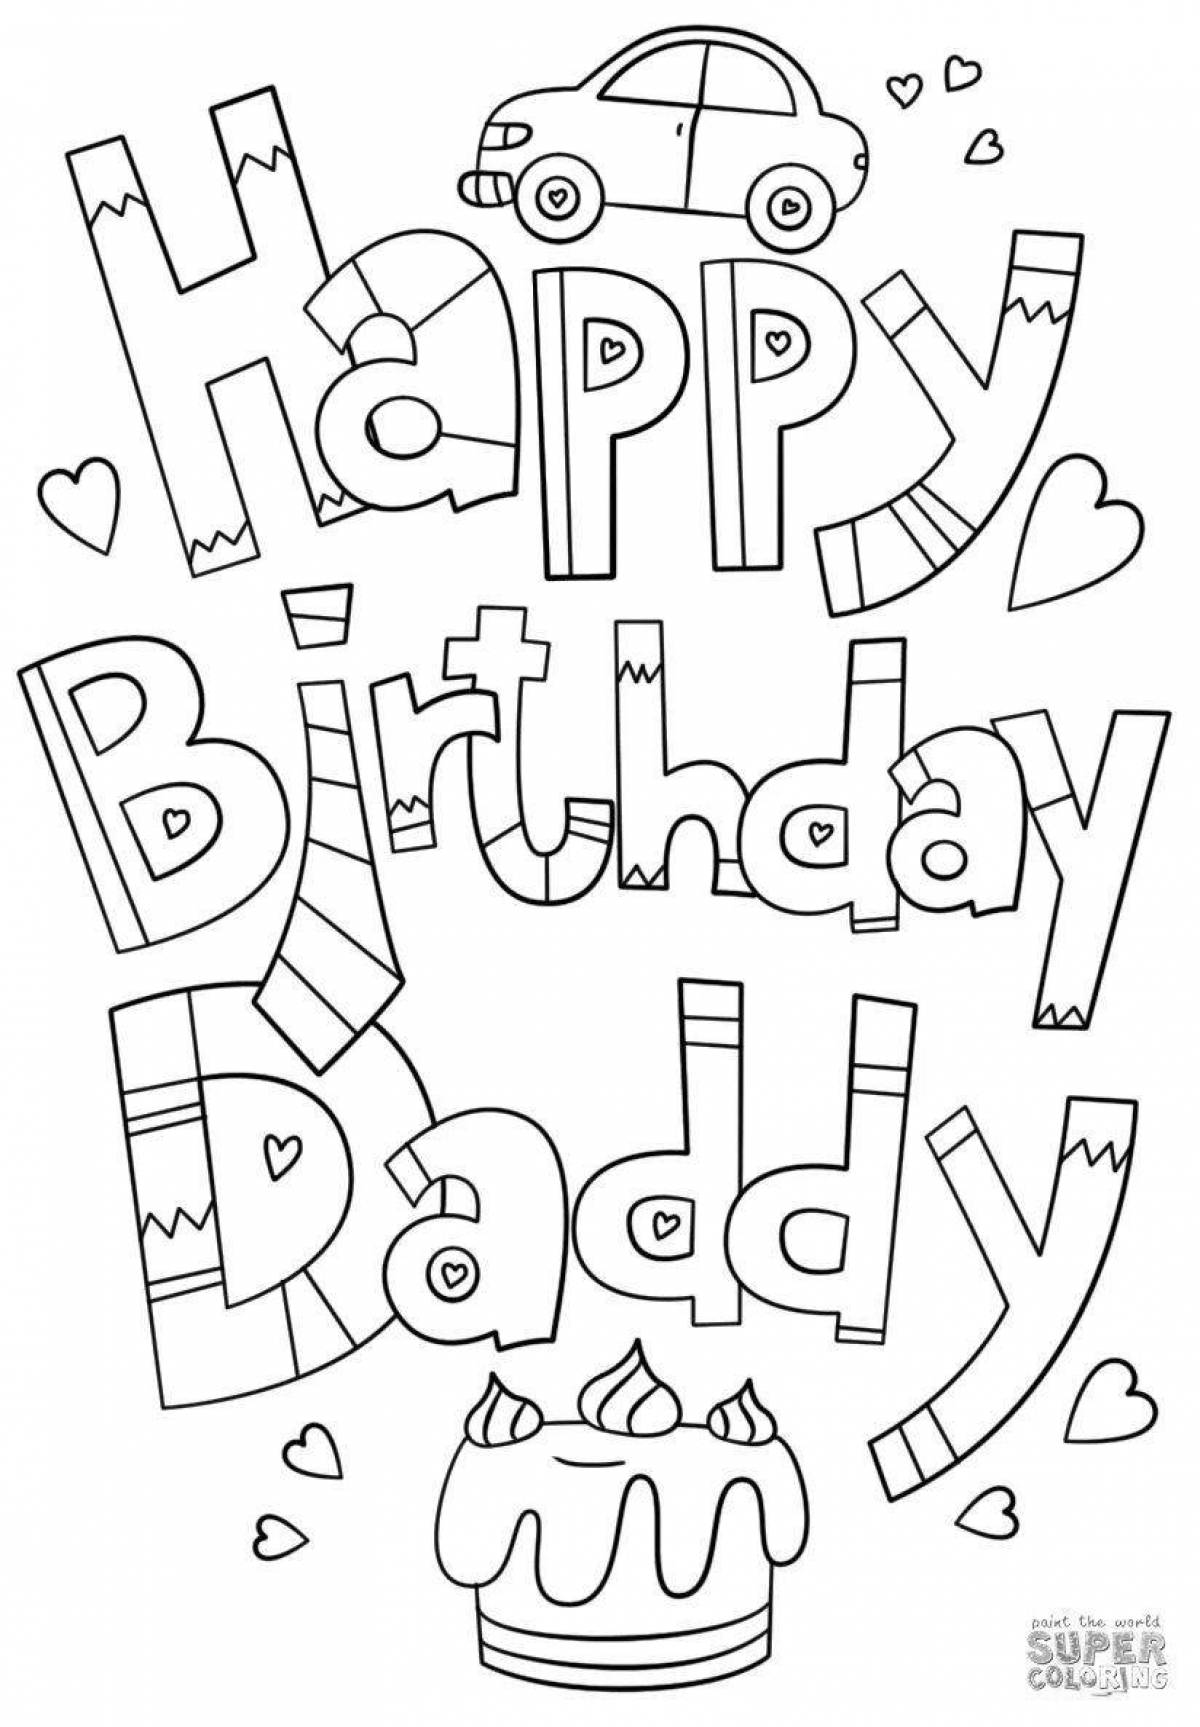 A lovely happy birthday card for dad